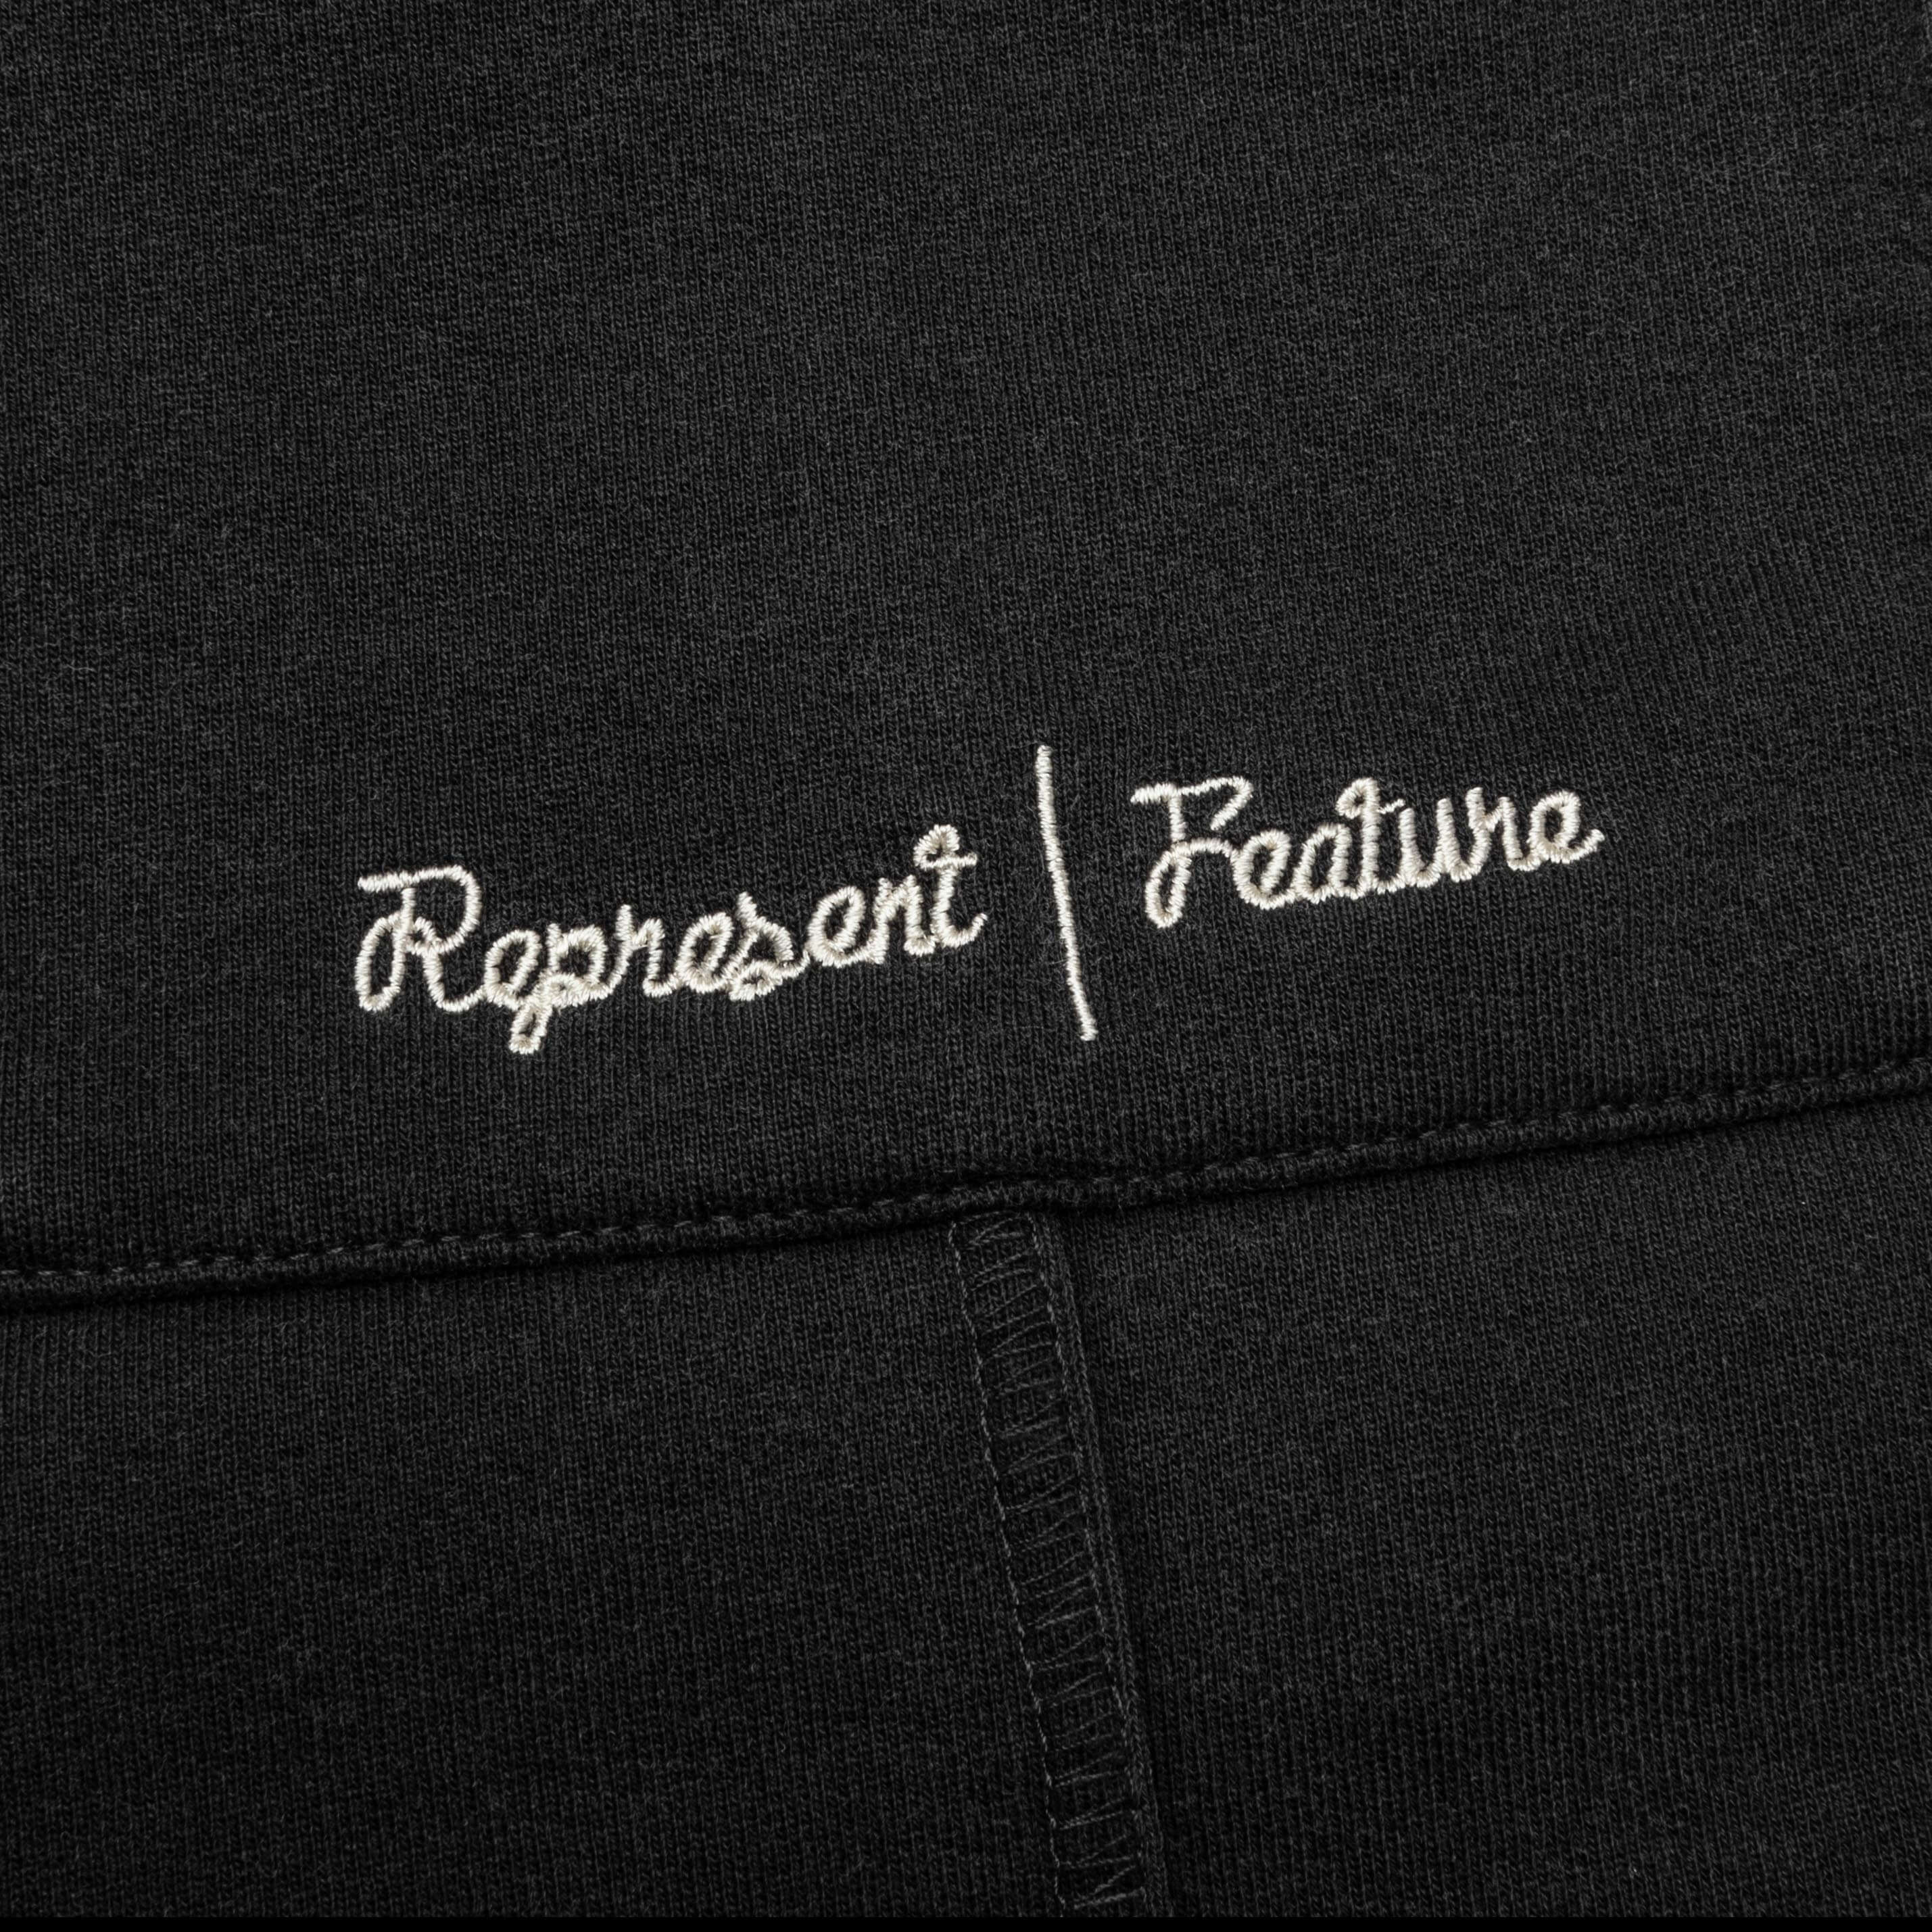 Feature x Represent Step Hem Sweatpants - Stained Black, , large image number null